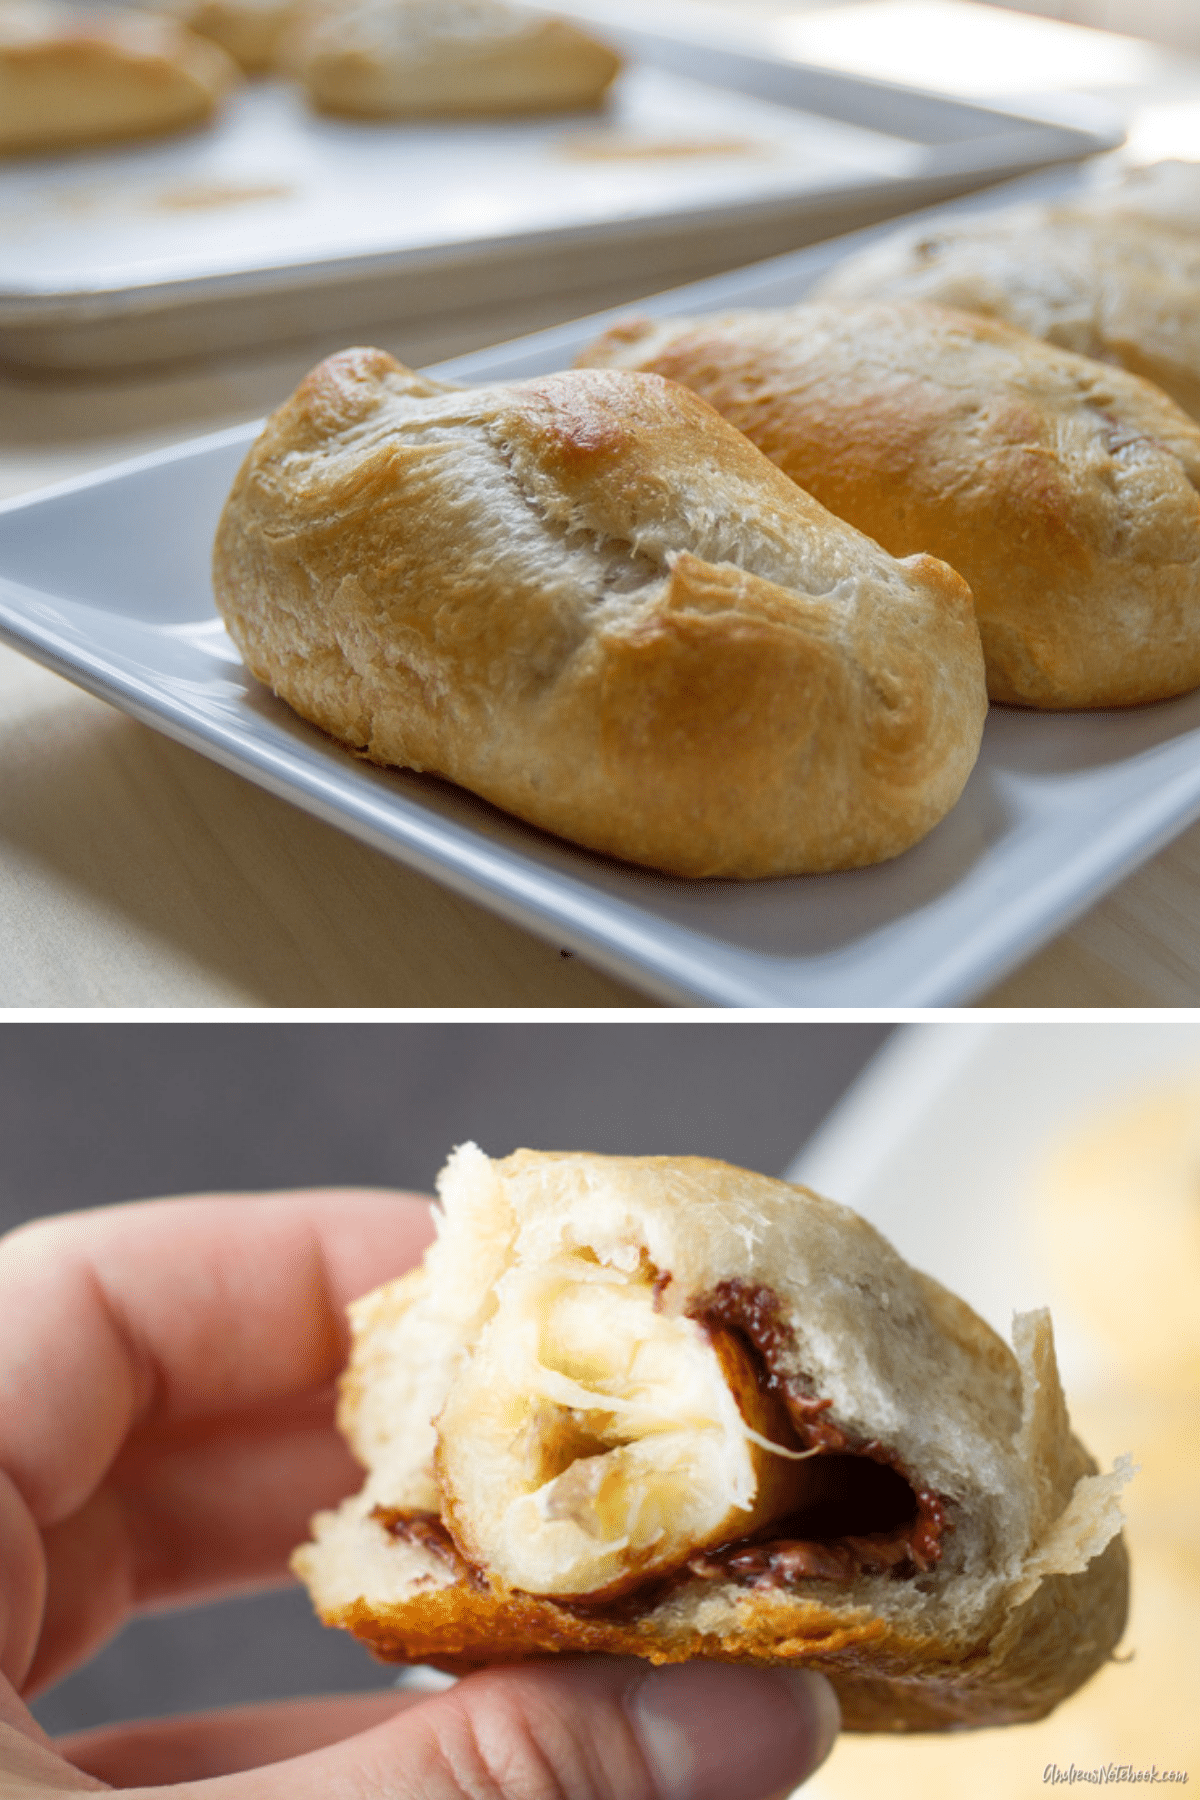 banana nutella roll opened with hands